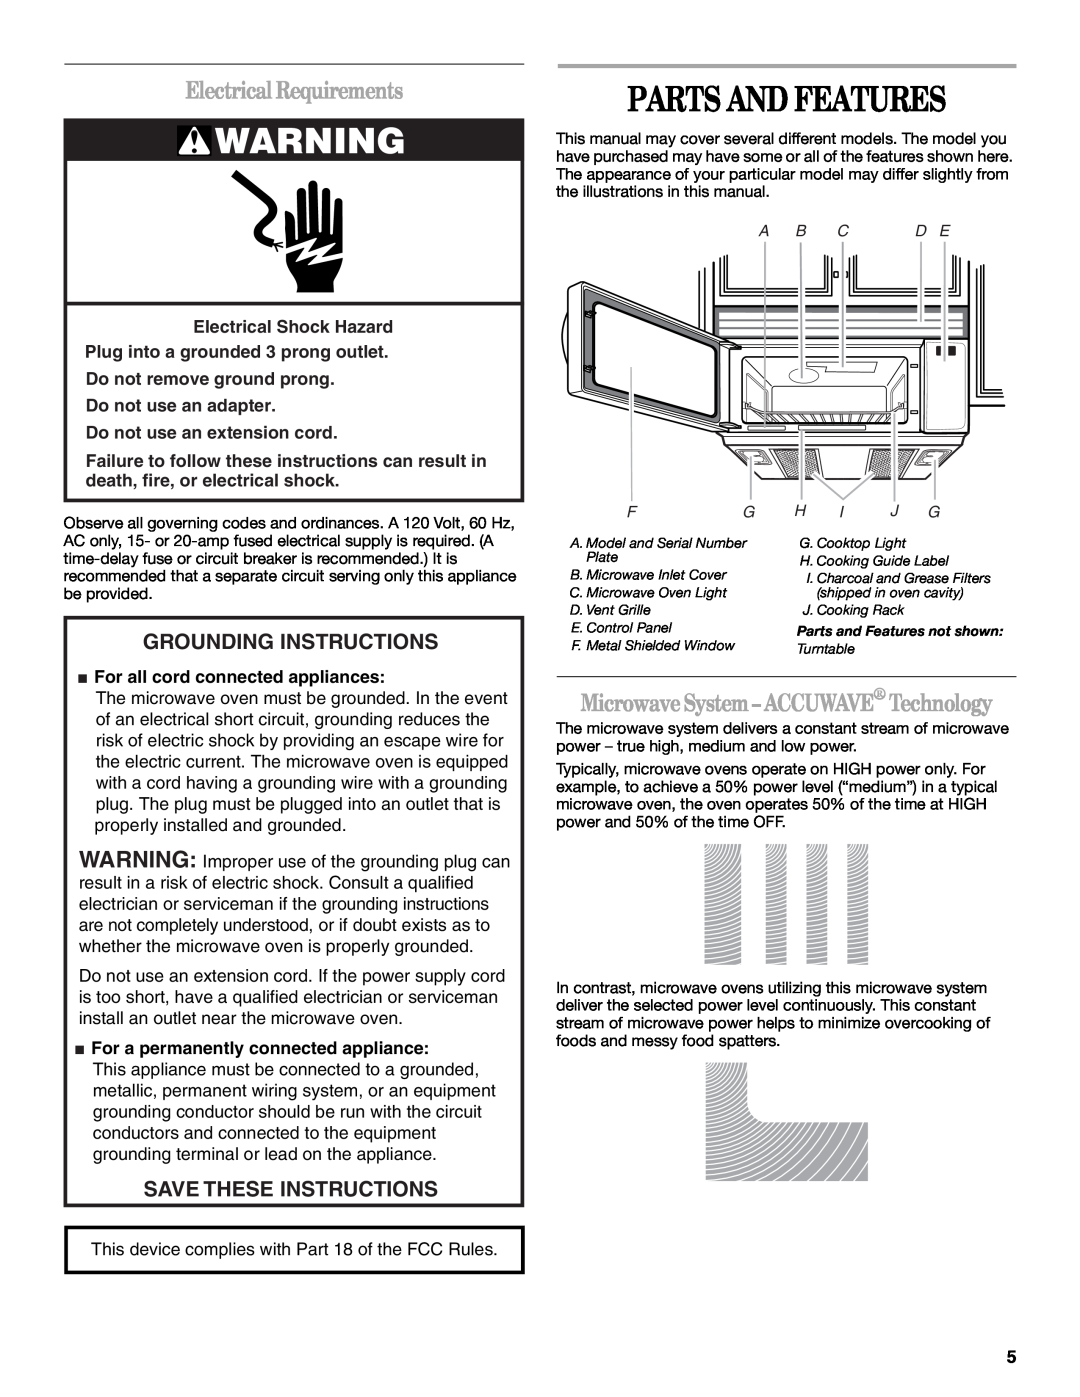 Whirlpool GH5184XP manual Parts And Features, Electrical Requirements, Grounding Instructions, Save These Instructions 